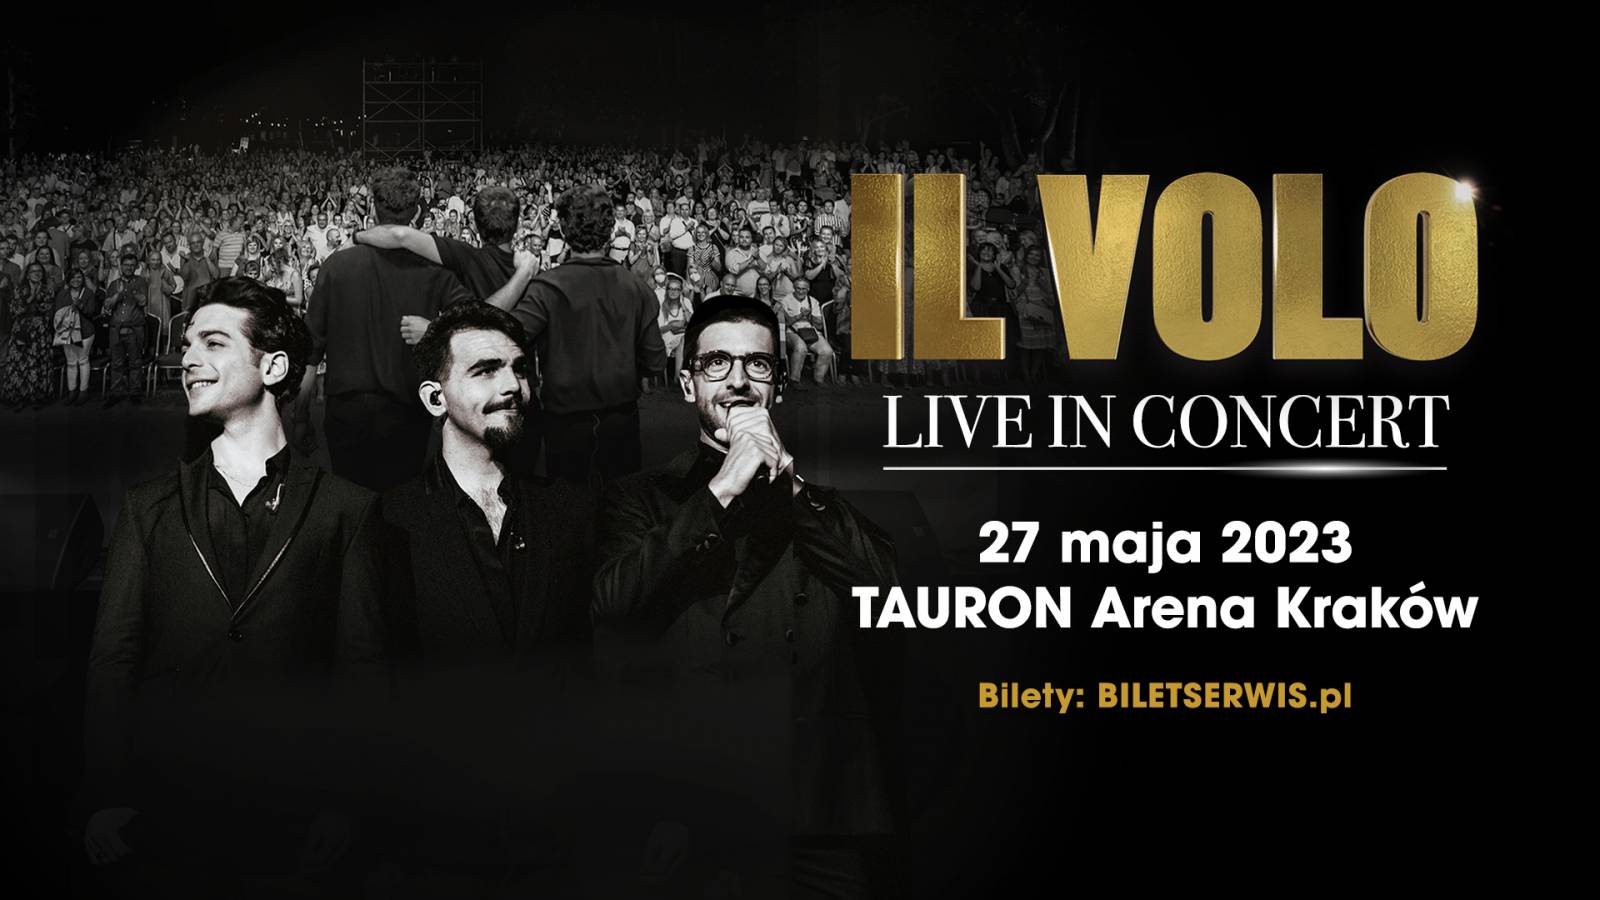 Il Volo: Live in Concert at Tauron Arena Kraków